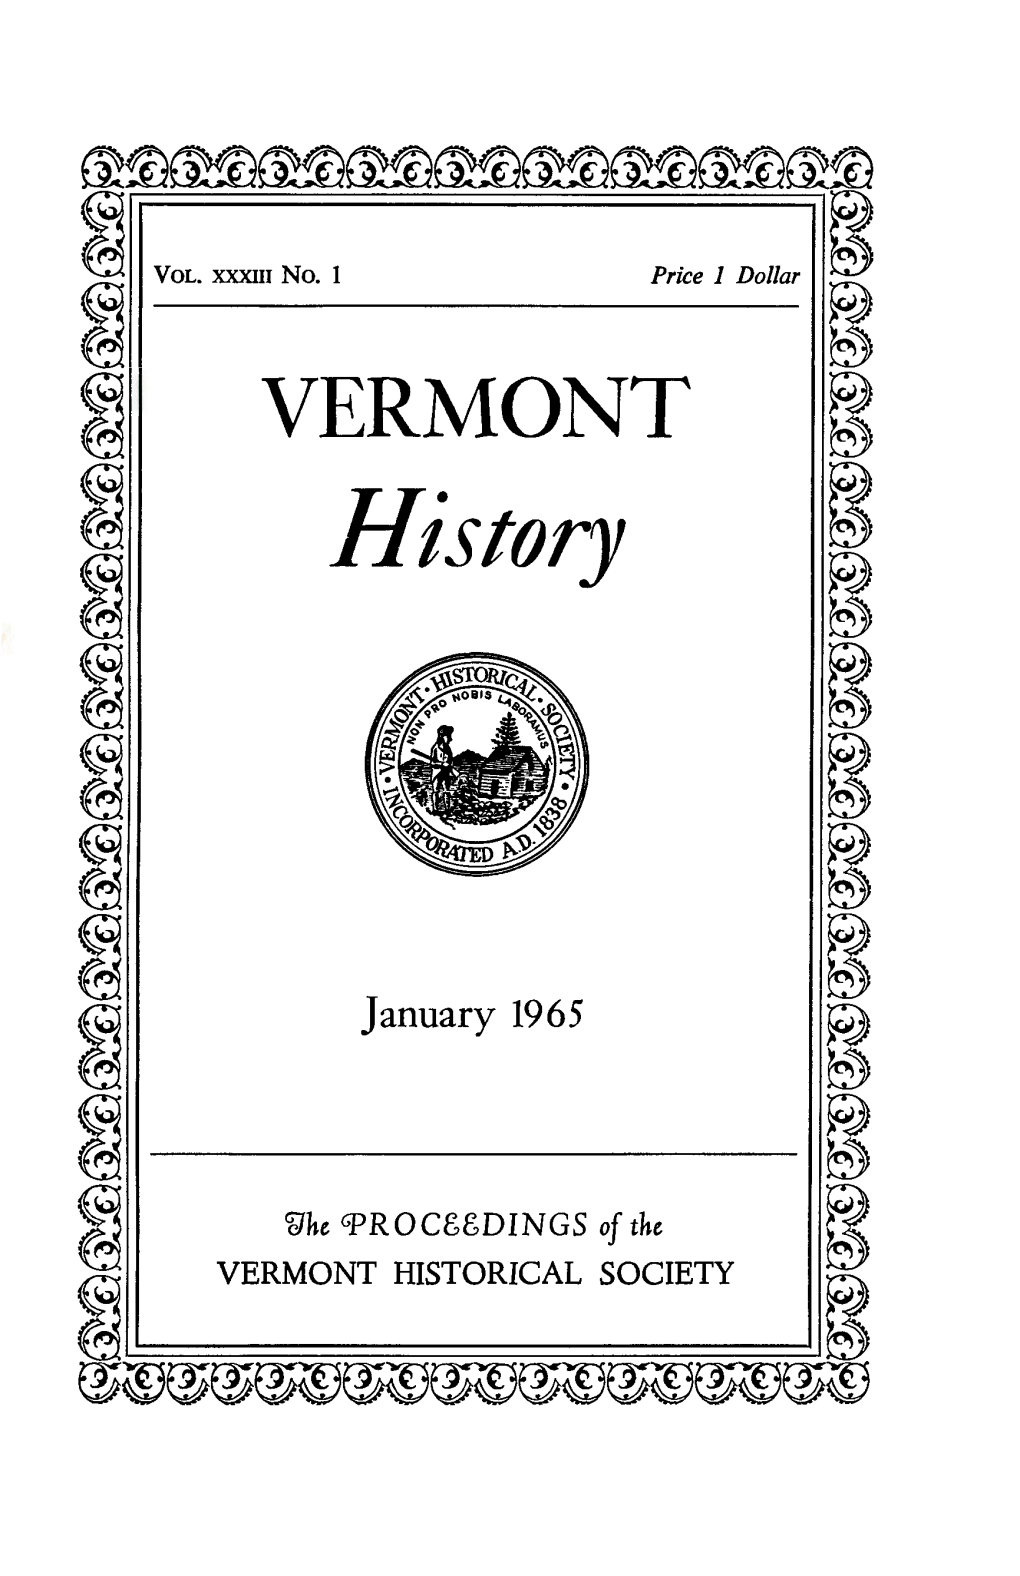 The Vermont Sheep Industry: 1811-1880